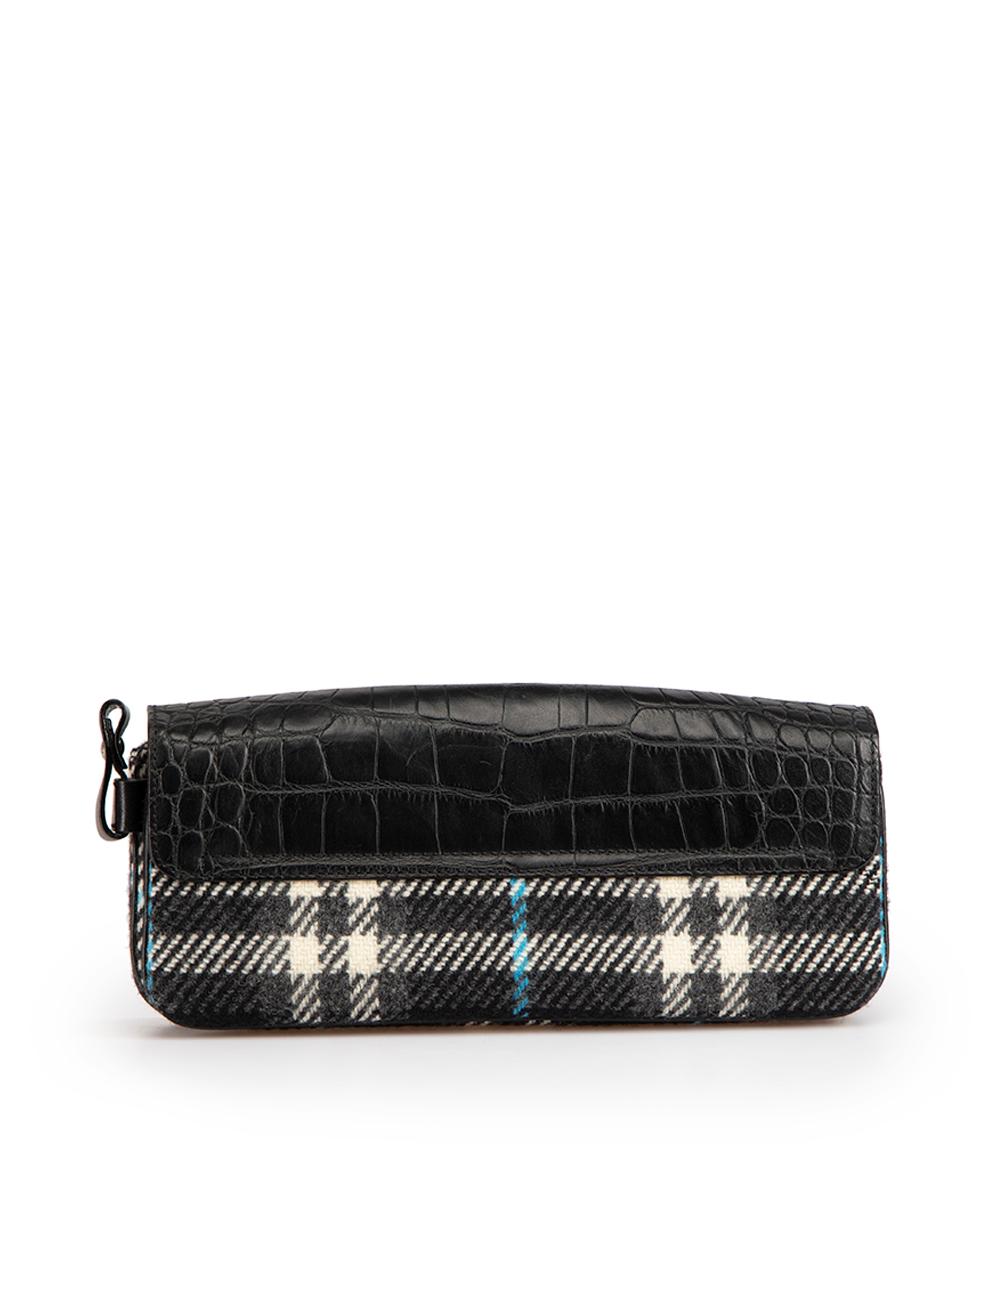 Burberry Black Checkered Clutch In Excellent Condition For Sale In London, GB